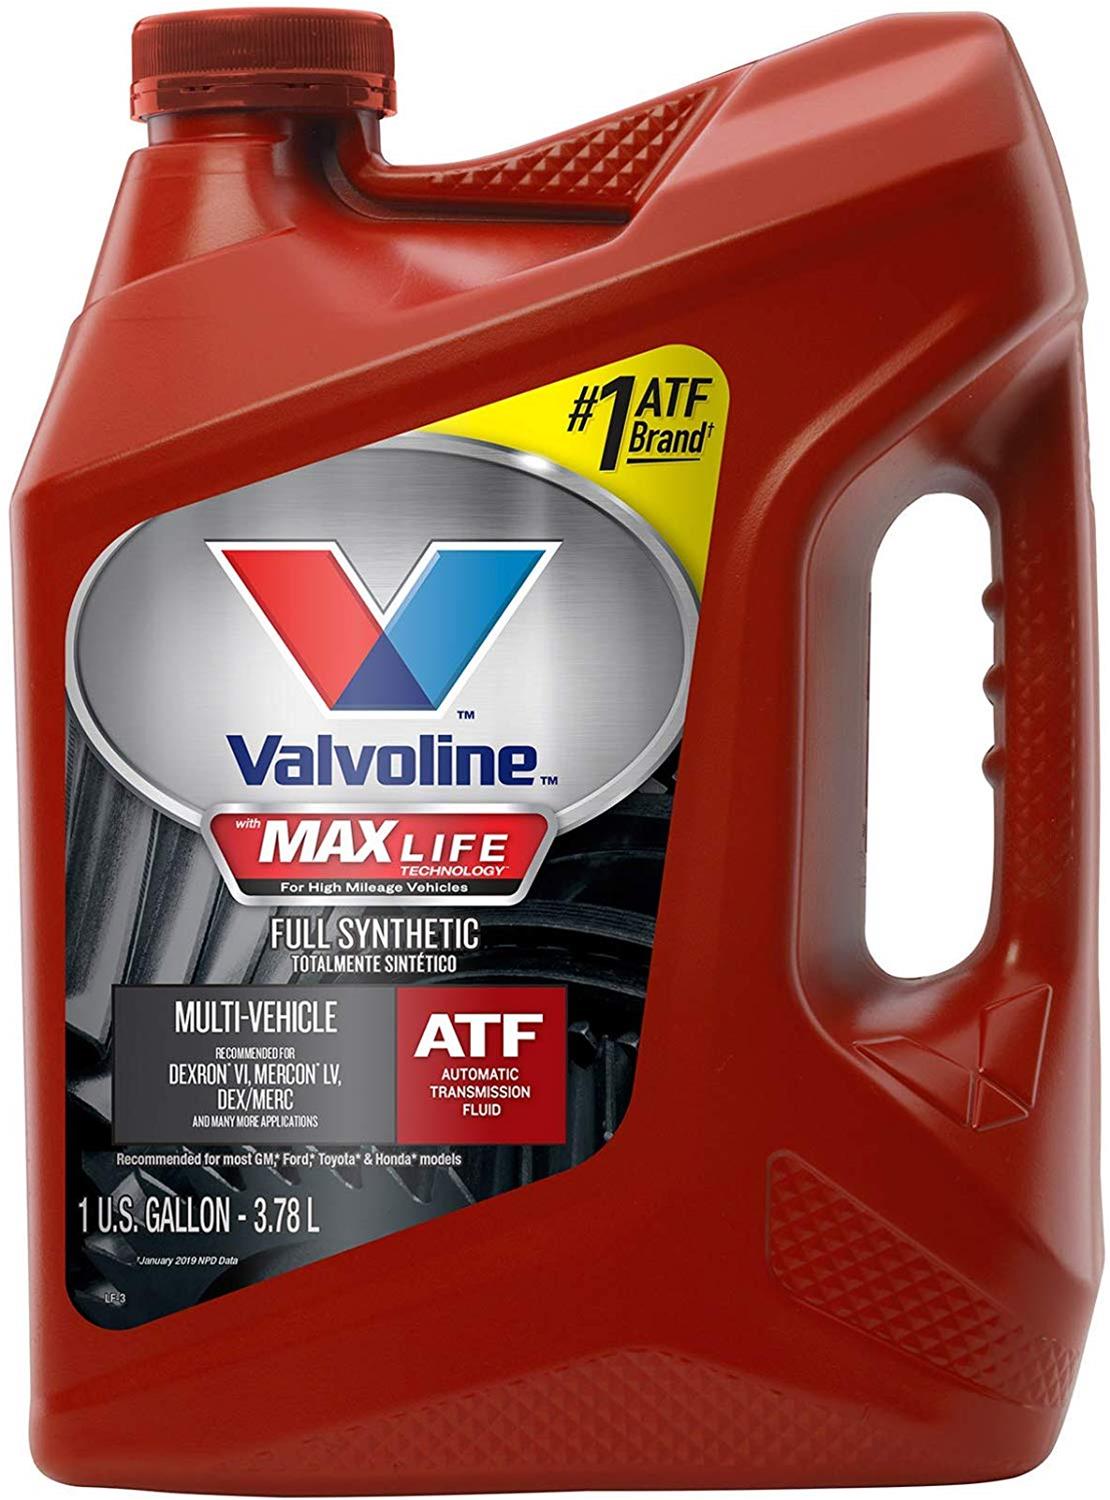 Multi-Vehicle (ATF) Automatic Transmission Fluid by Valvoline at